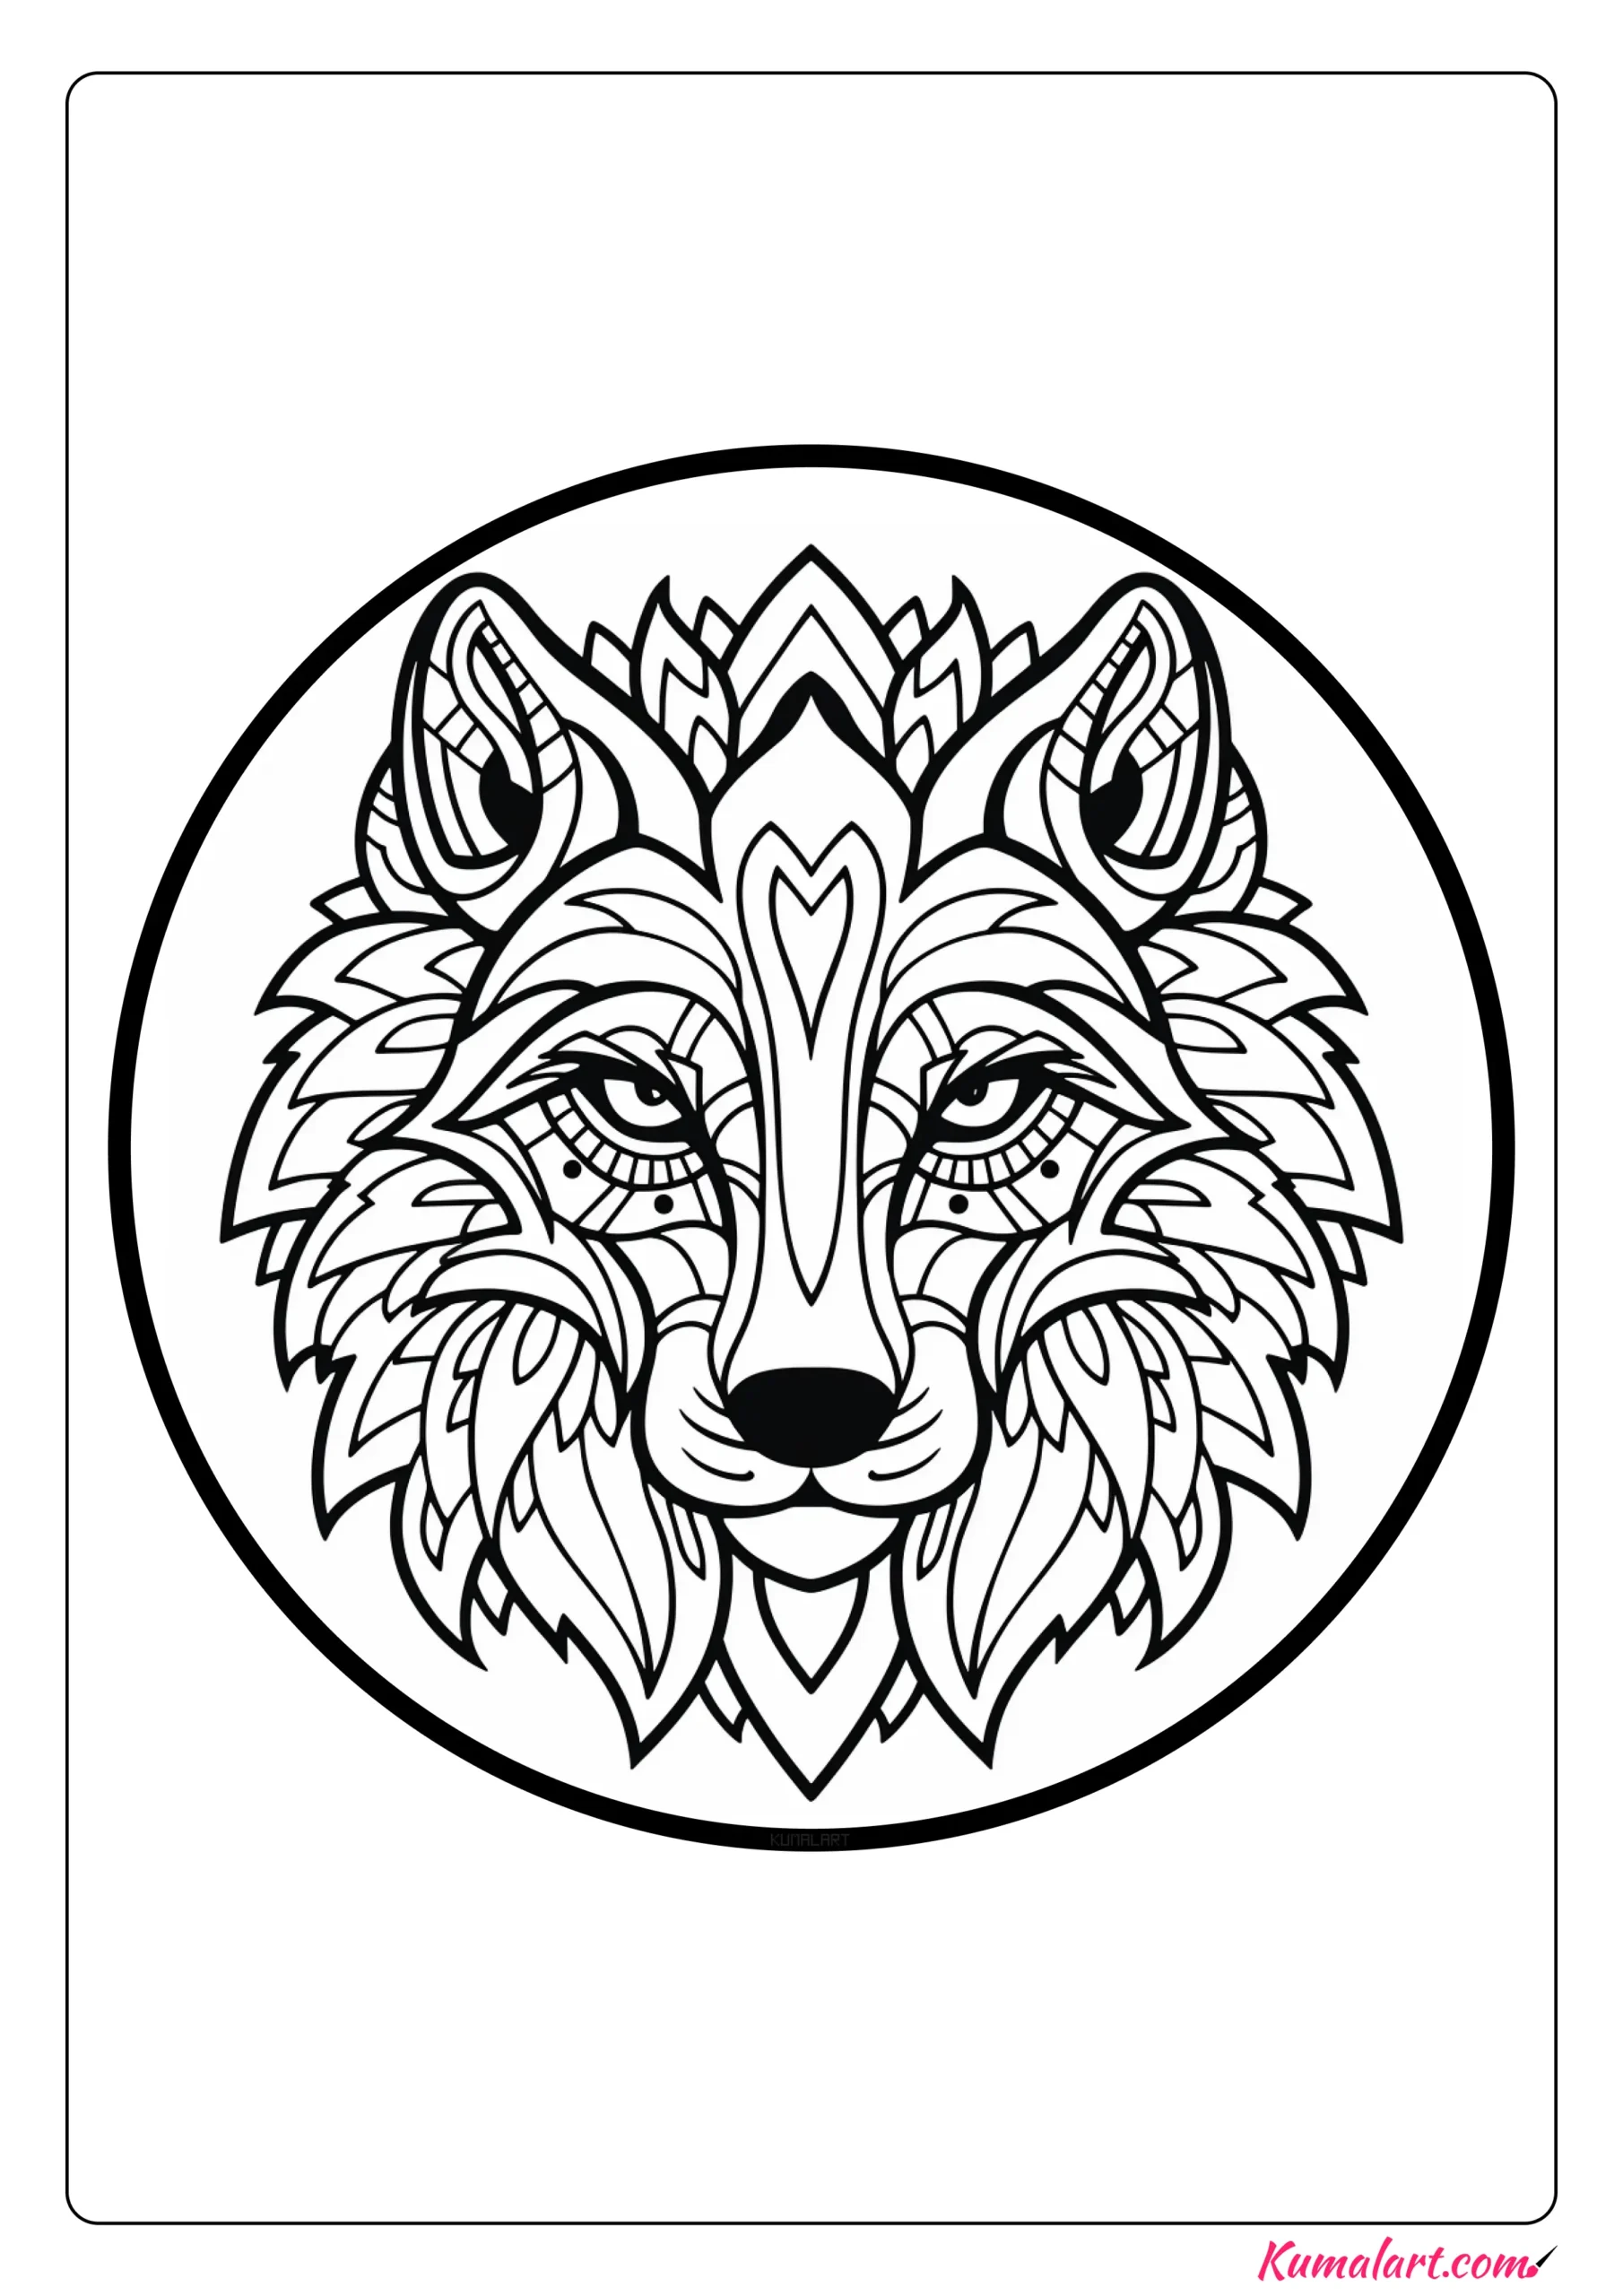 Alice the Wolf Mandala Coloring Page